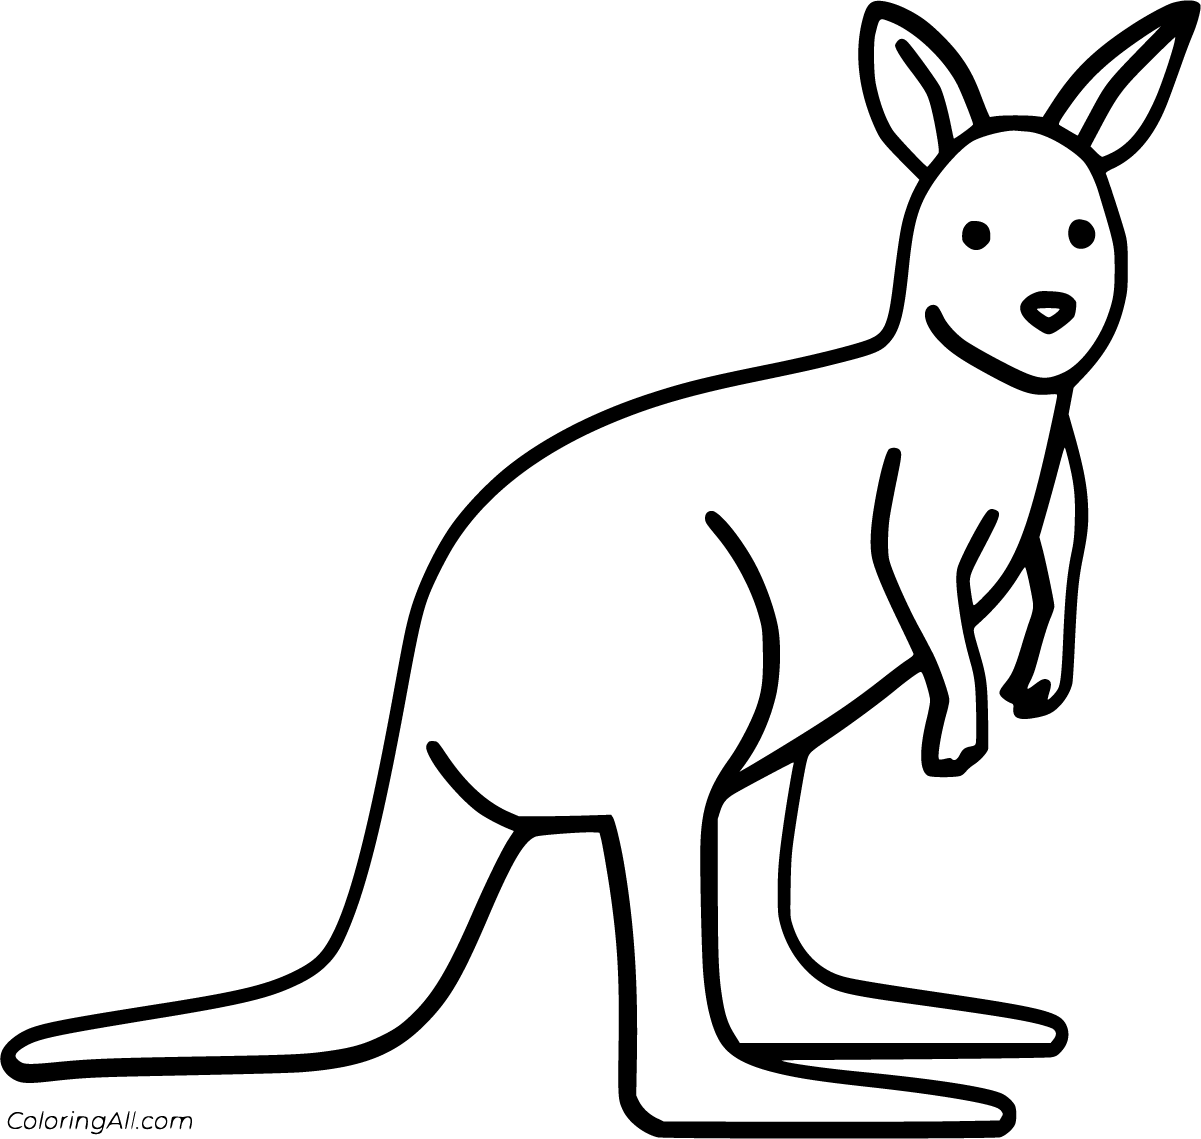 Wallaby Coloring Pages - ColoringAll